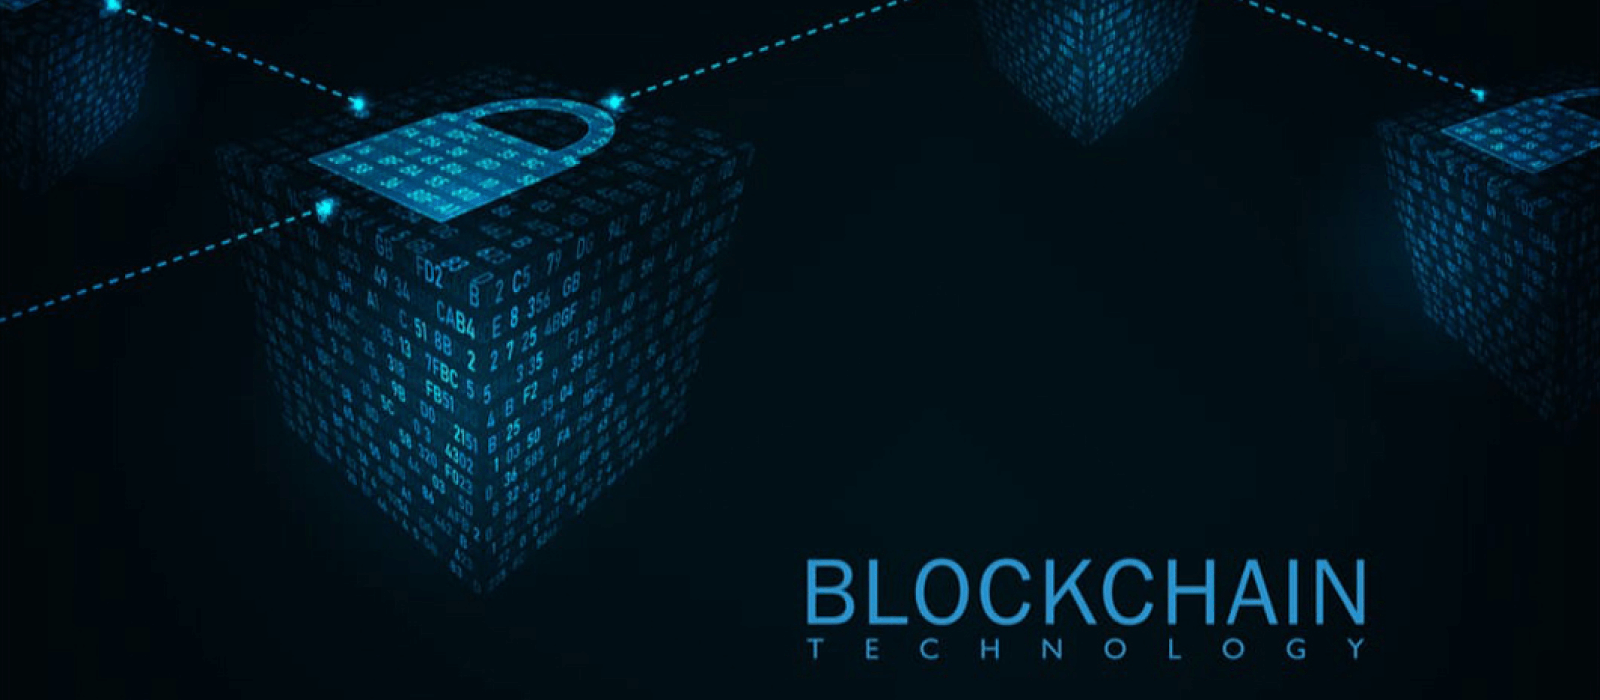 How Does Blockchain Transparency Drive Value?